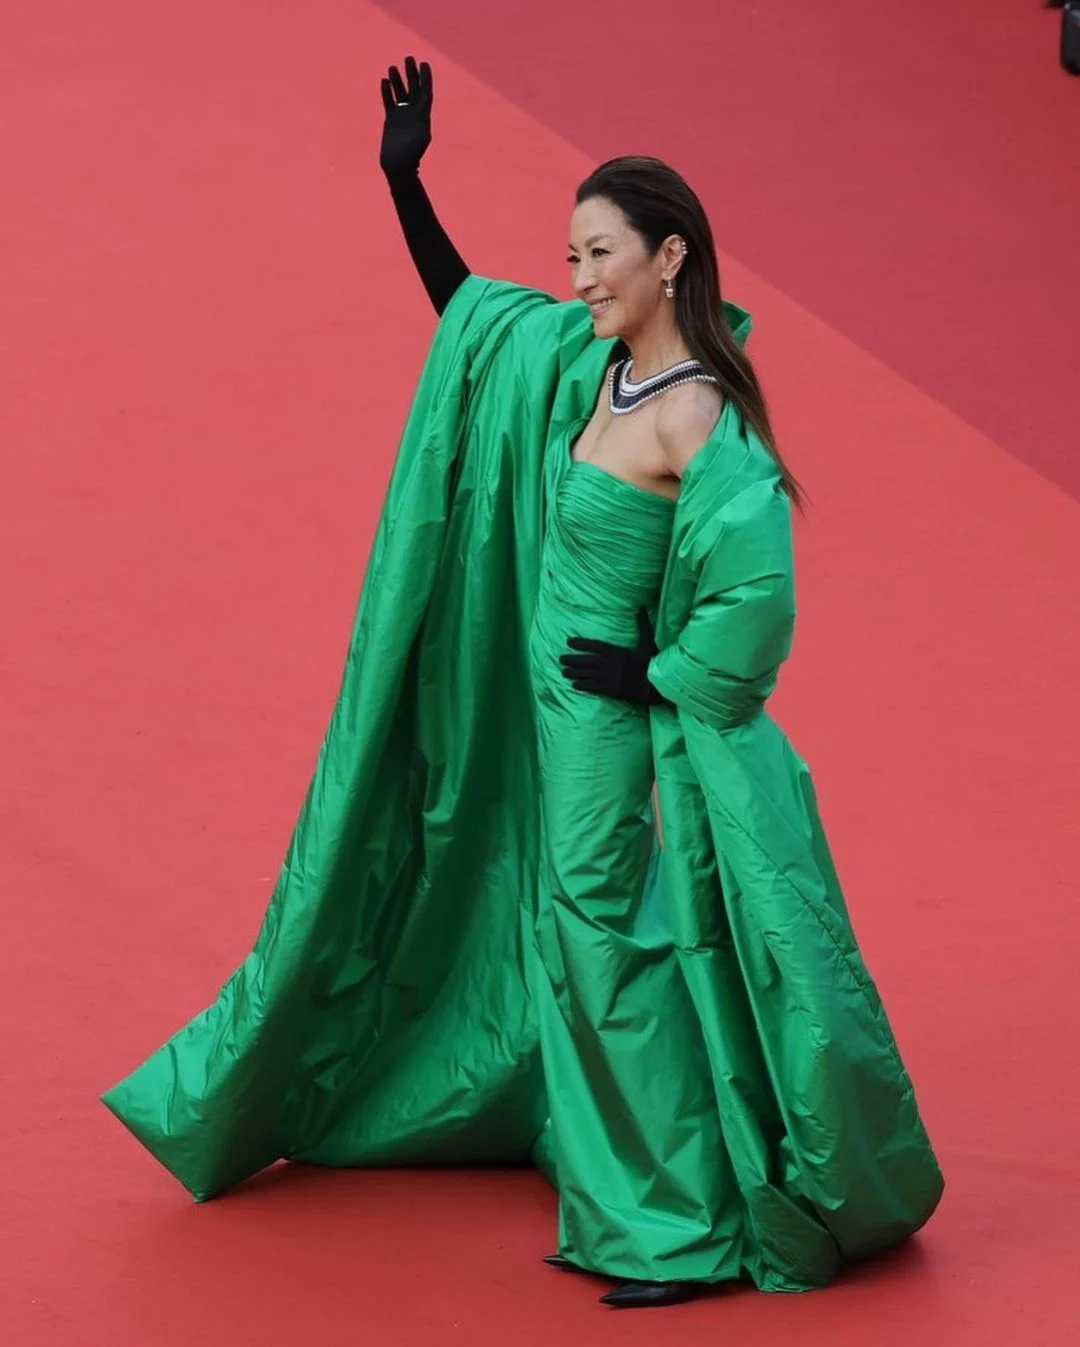 A striking emerald green gown with a floor-length shawl and opera gloves marked one of her memorable red carpet appearances. 